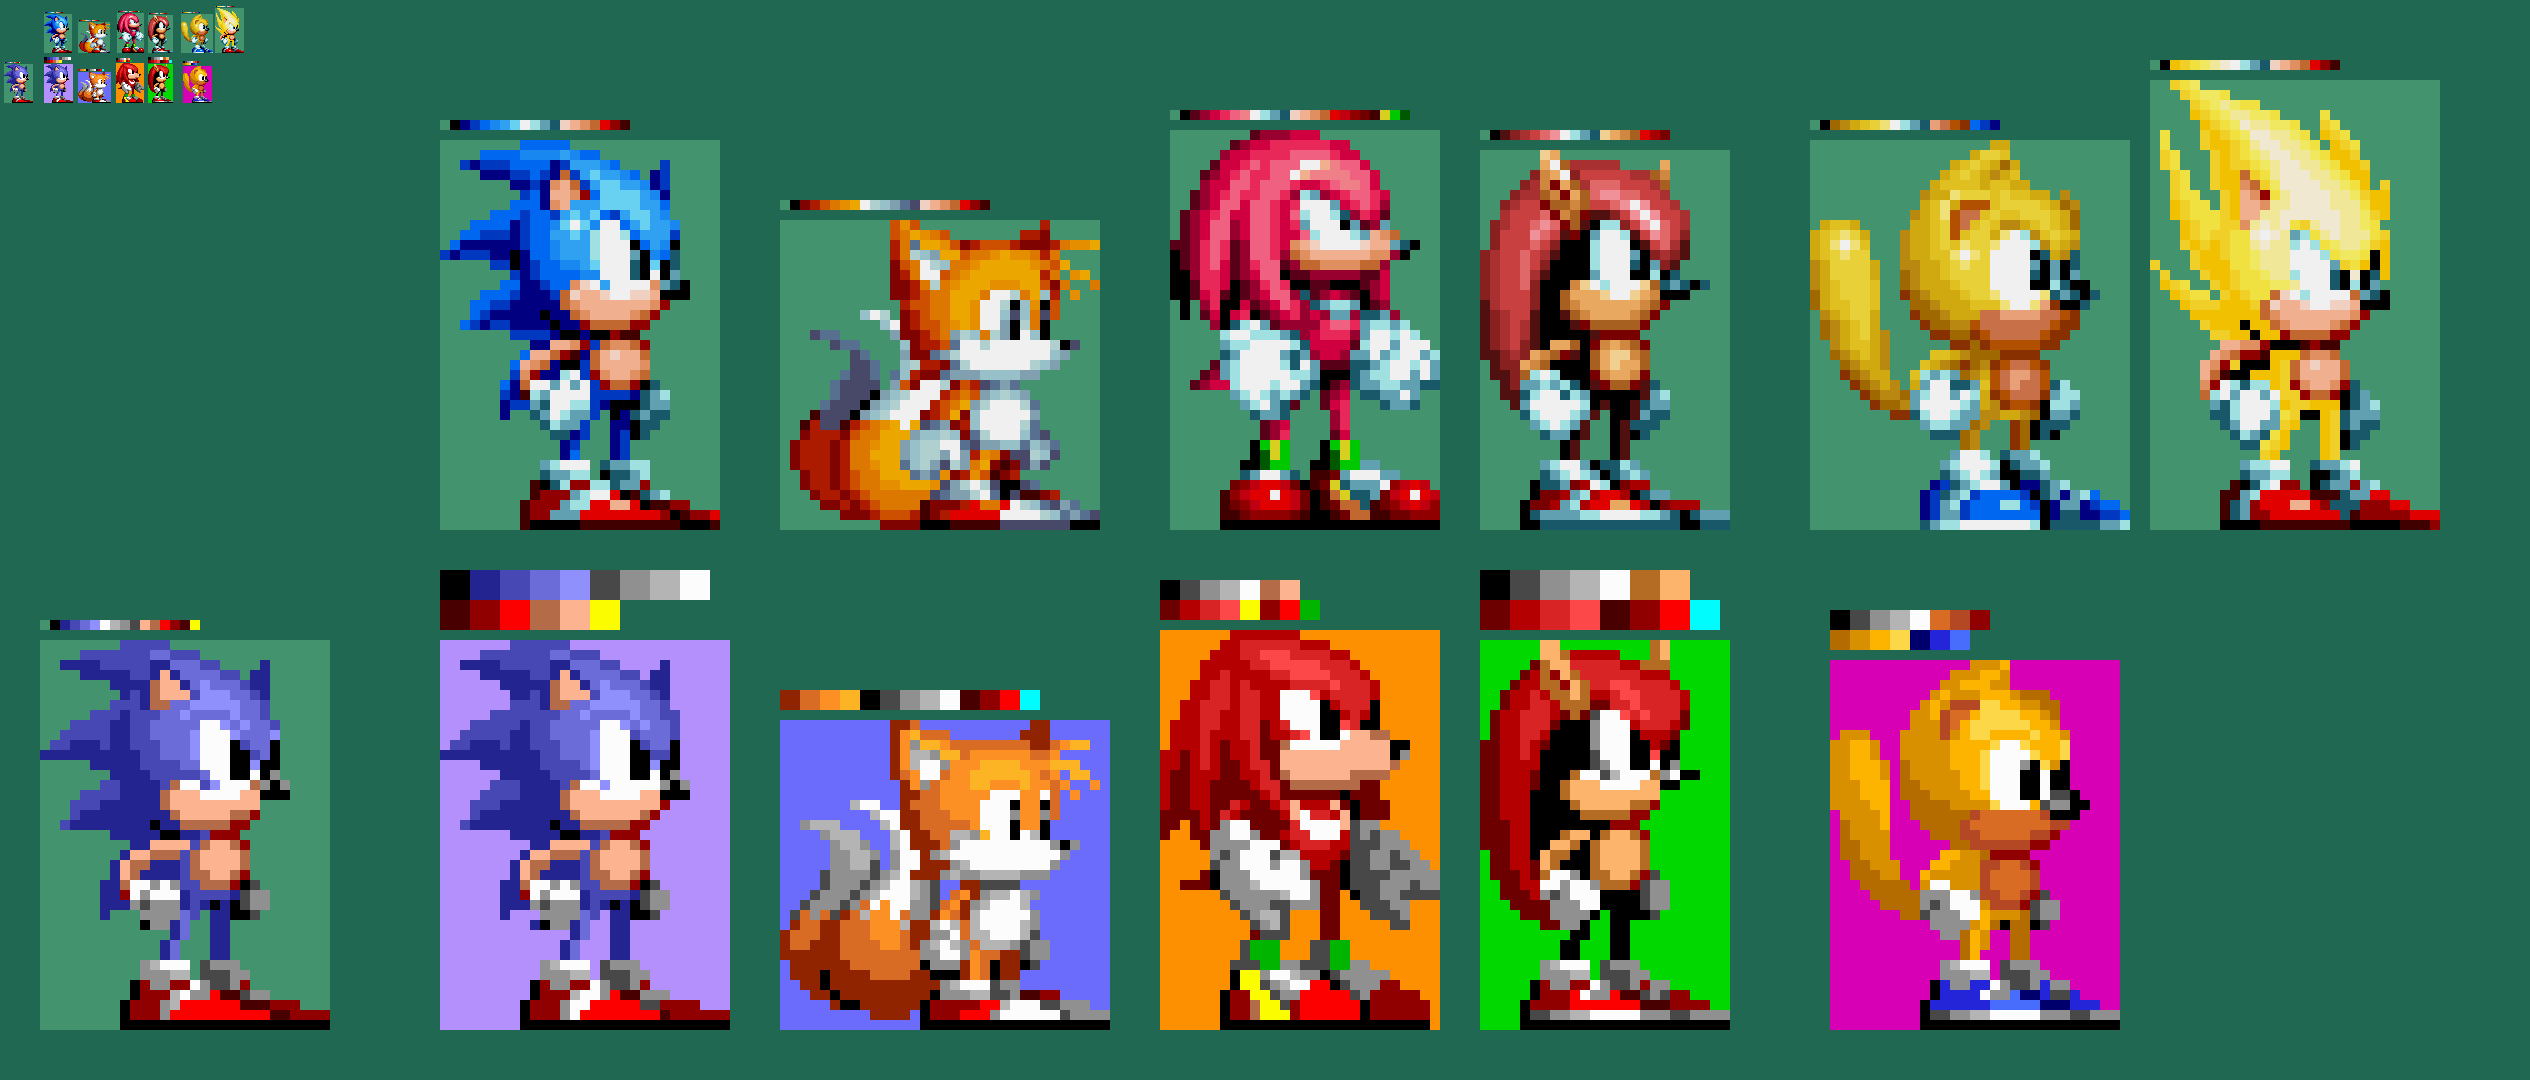 DeltaConduit's Tails and Knuckles [Sonic the Hedgehog Forever] [Mods]